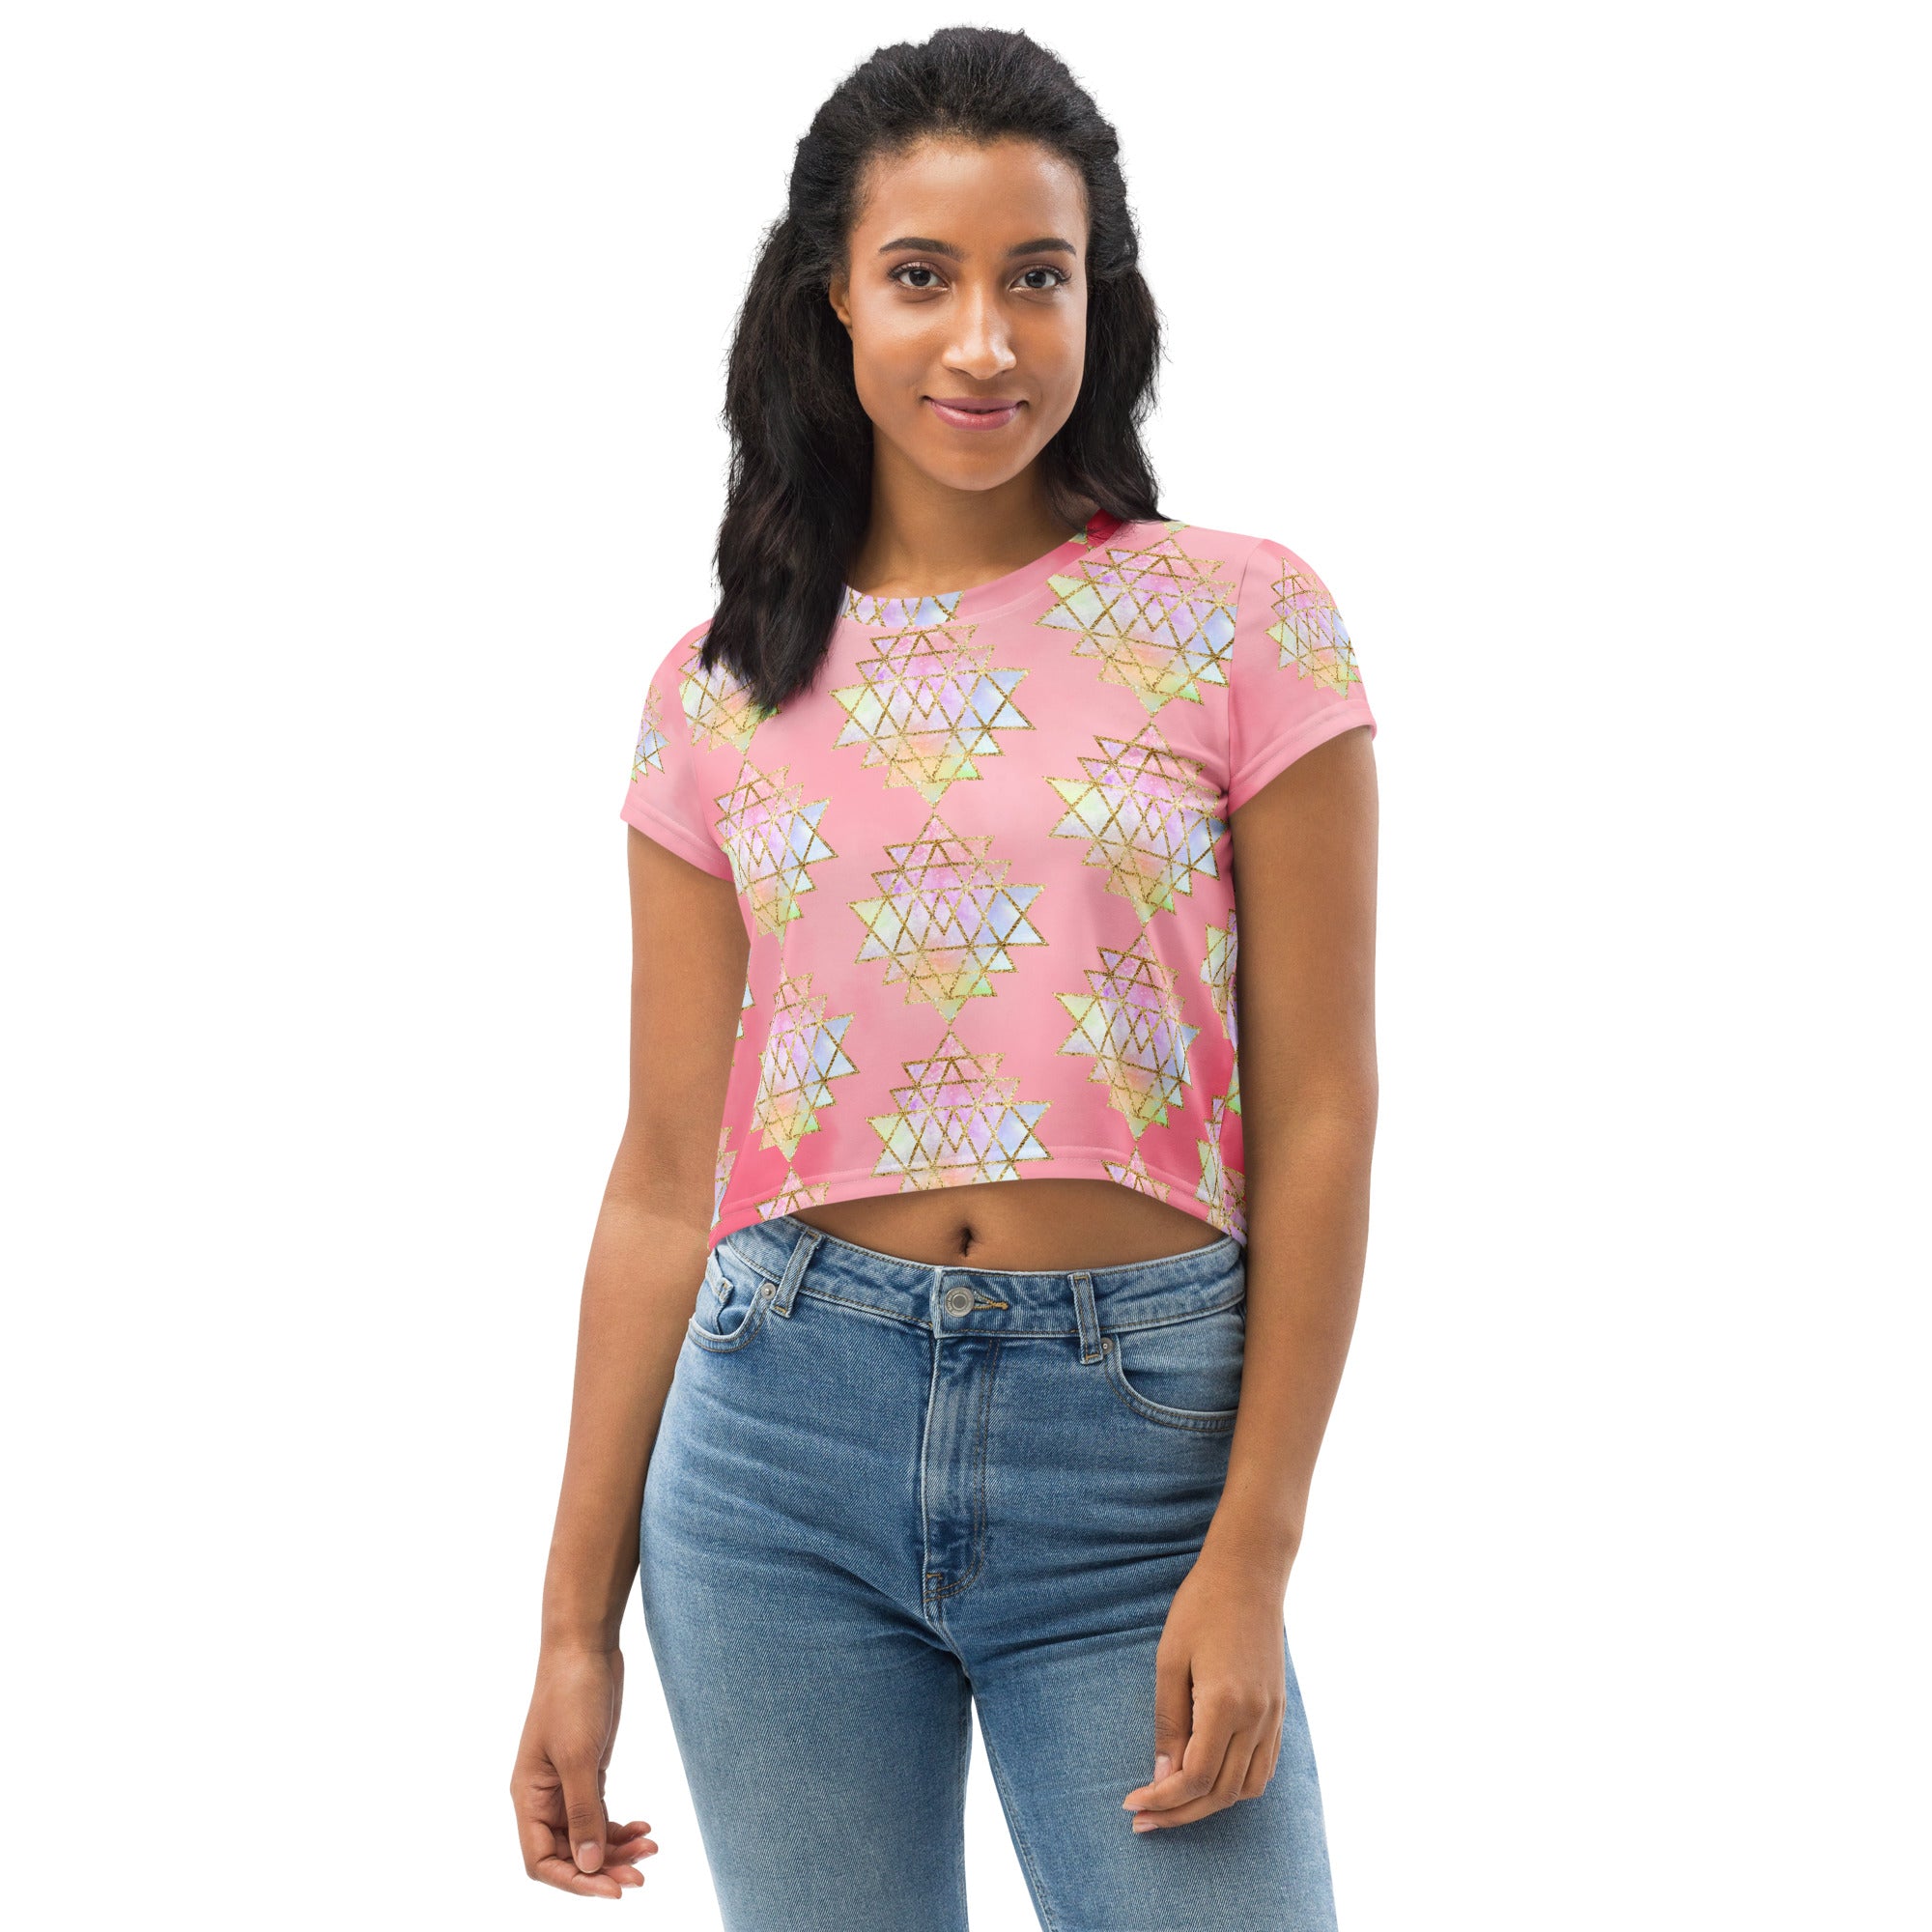 Light to medium pink background with pastel and gold color sri yantra design all over front back and short sleeves.  This is a crop top tee by goddess swag as part of the cosmic powers collection